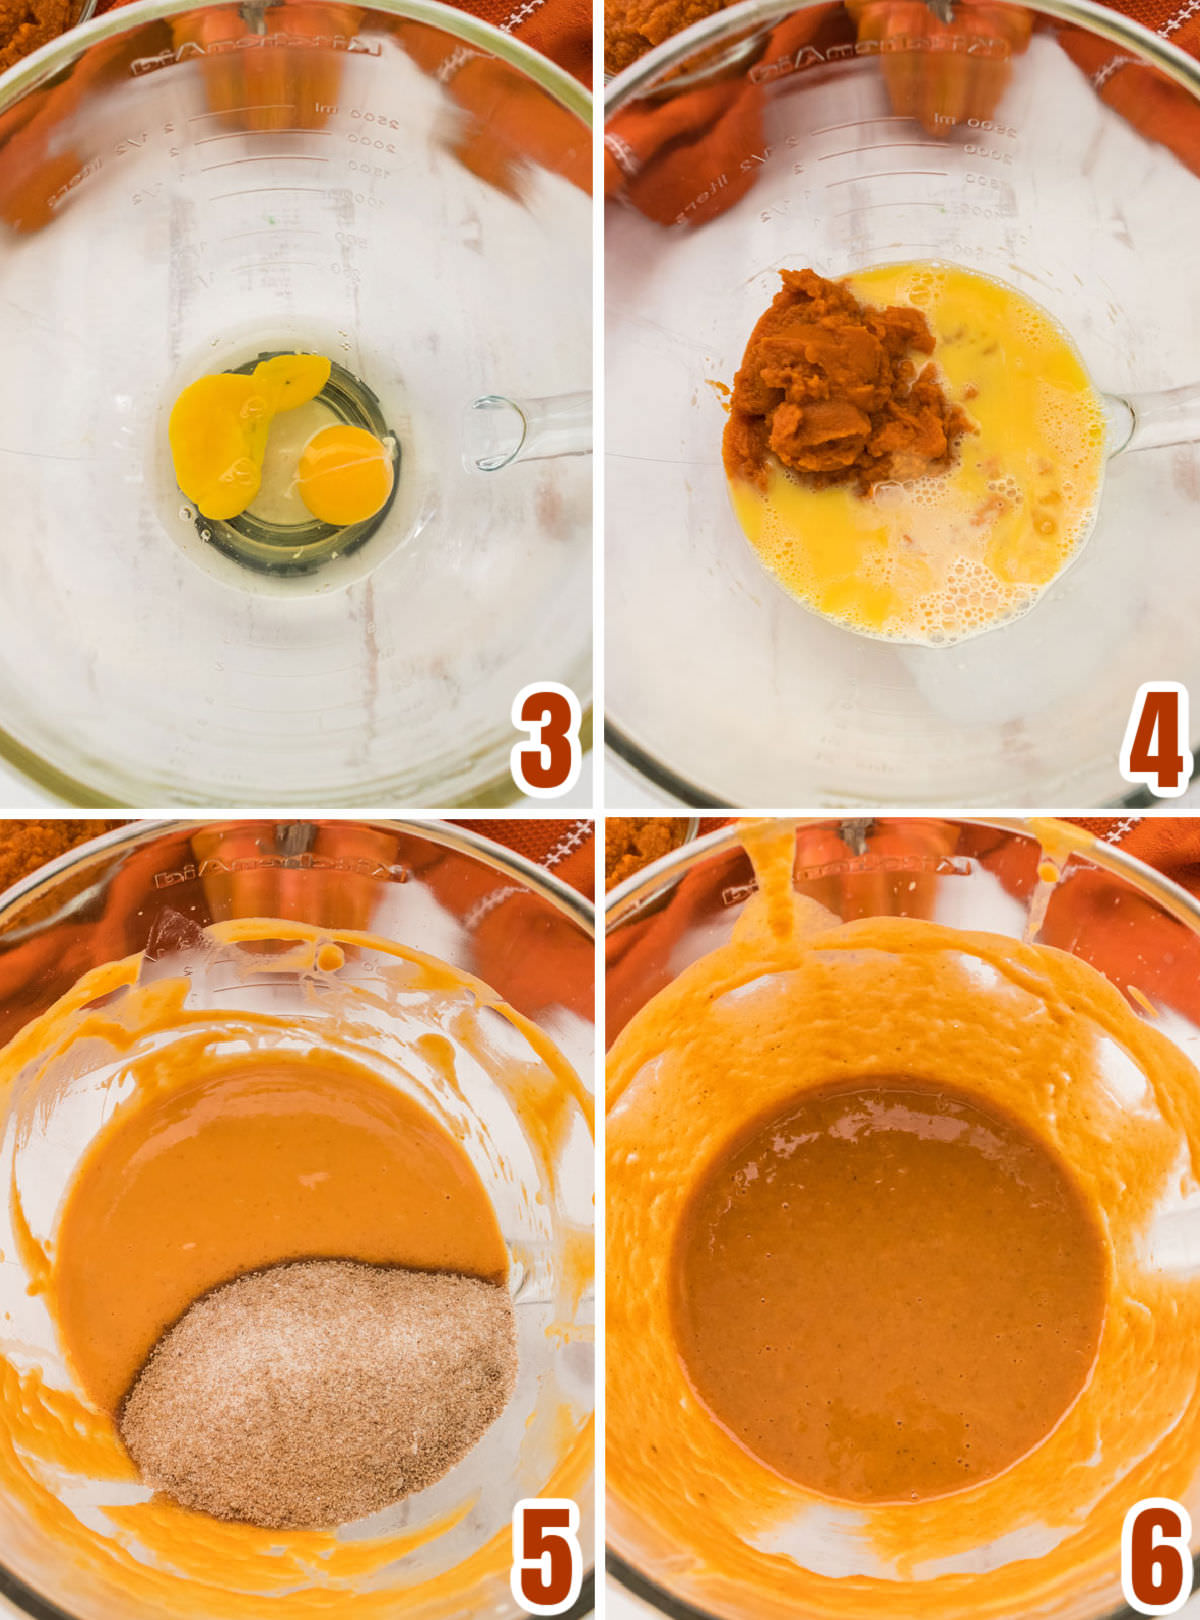 Collage image showing how to make the Pumpkin Pie Filling. 